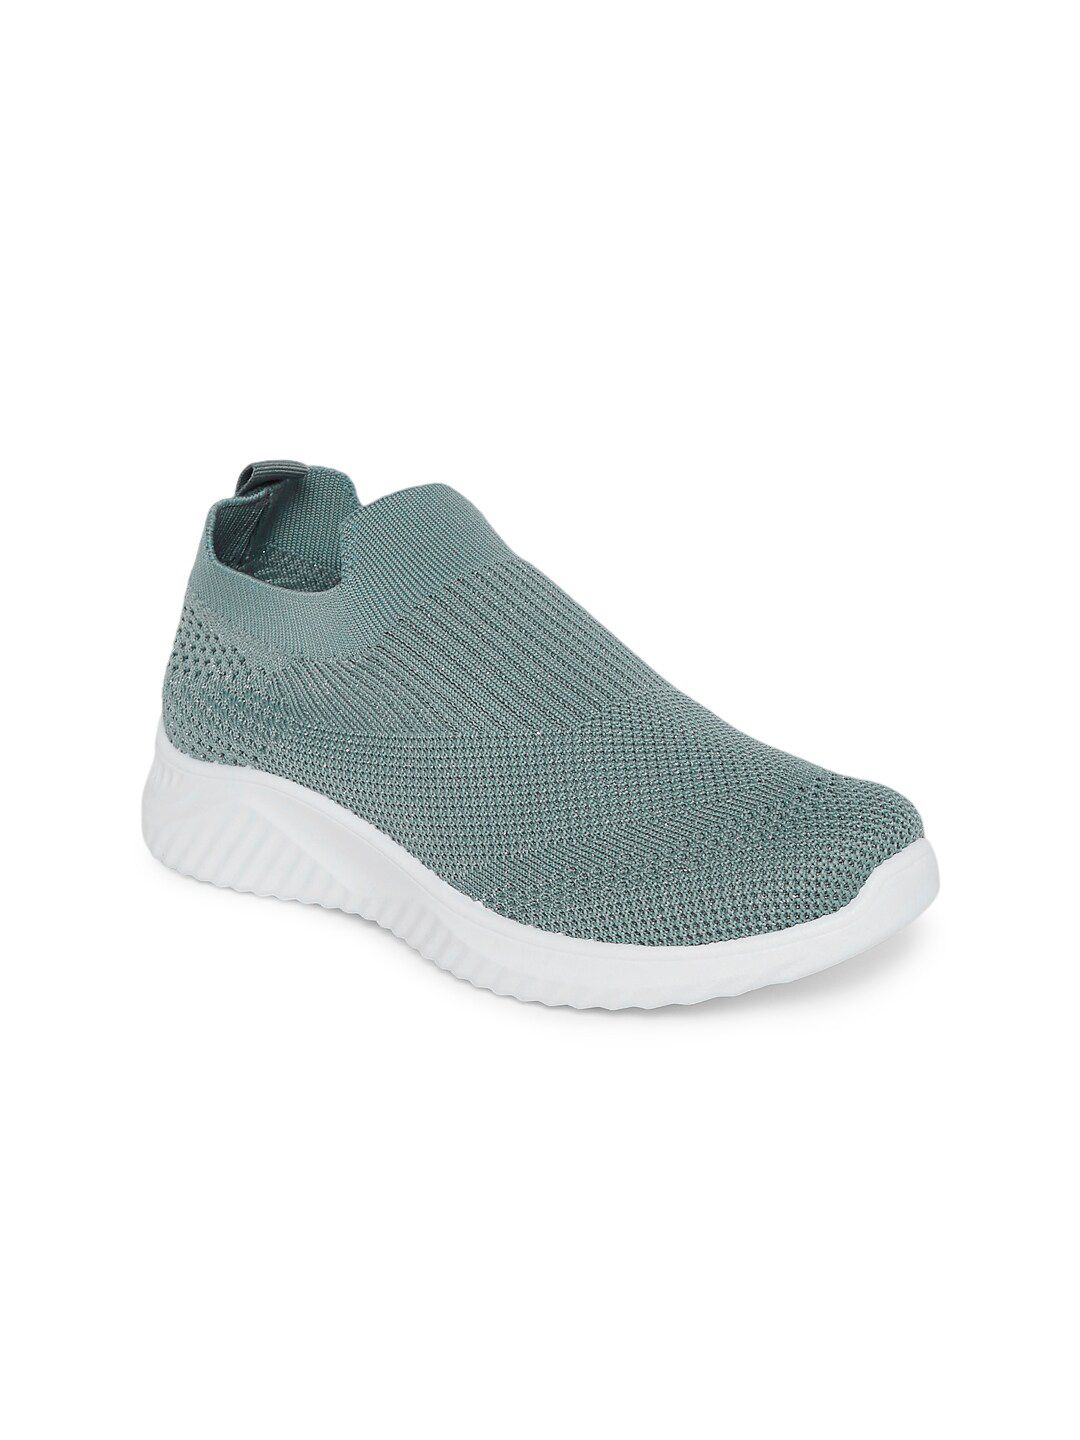 Forever Glam by Pantaloons Women Green Slip-On Sneakers Price in India